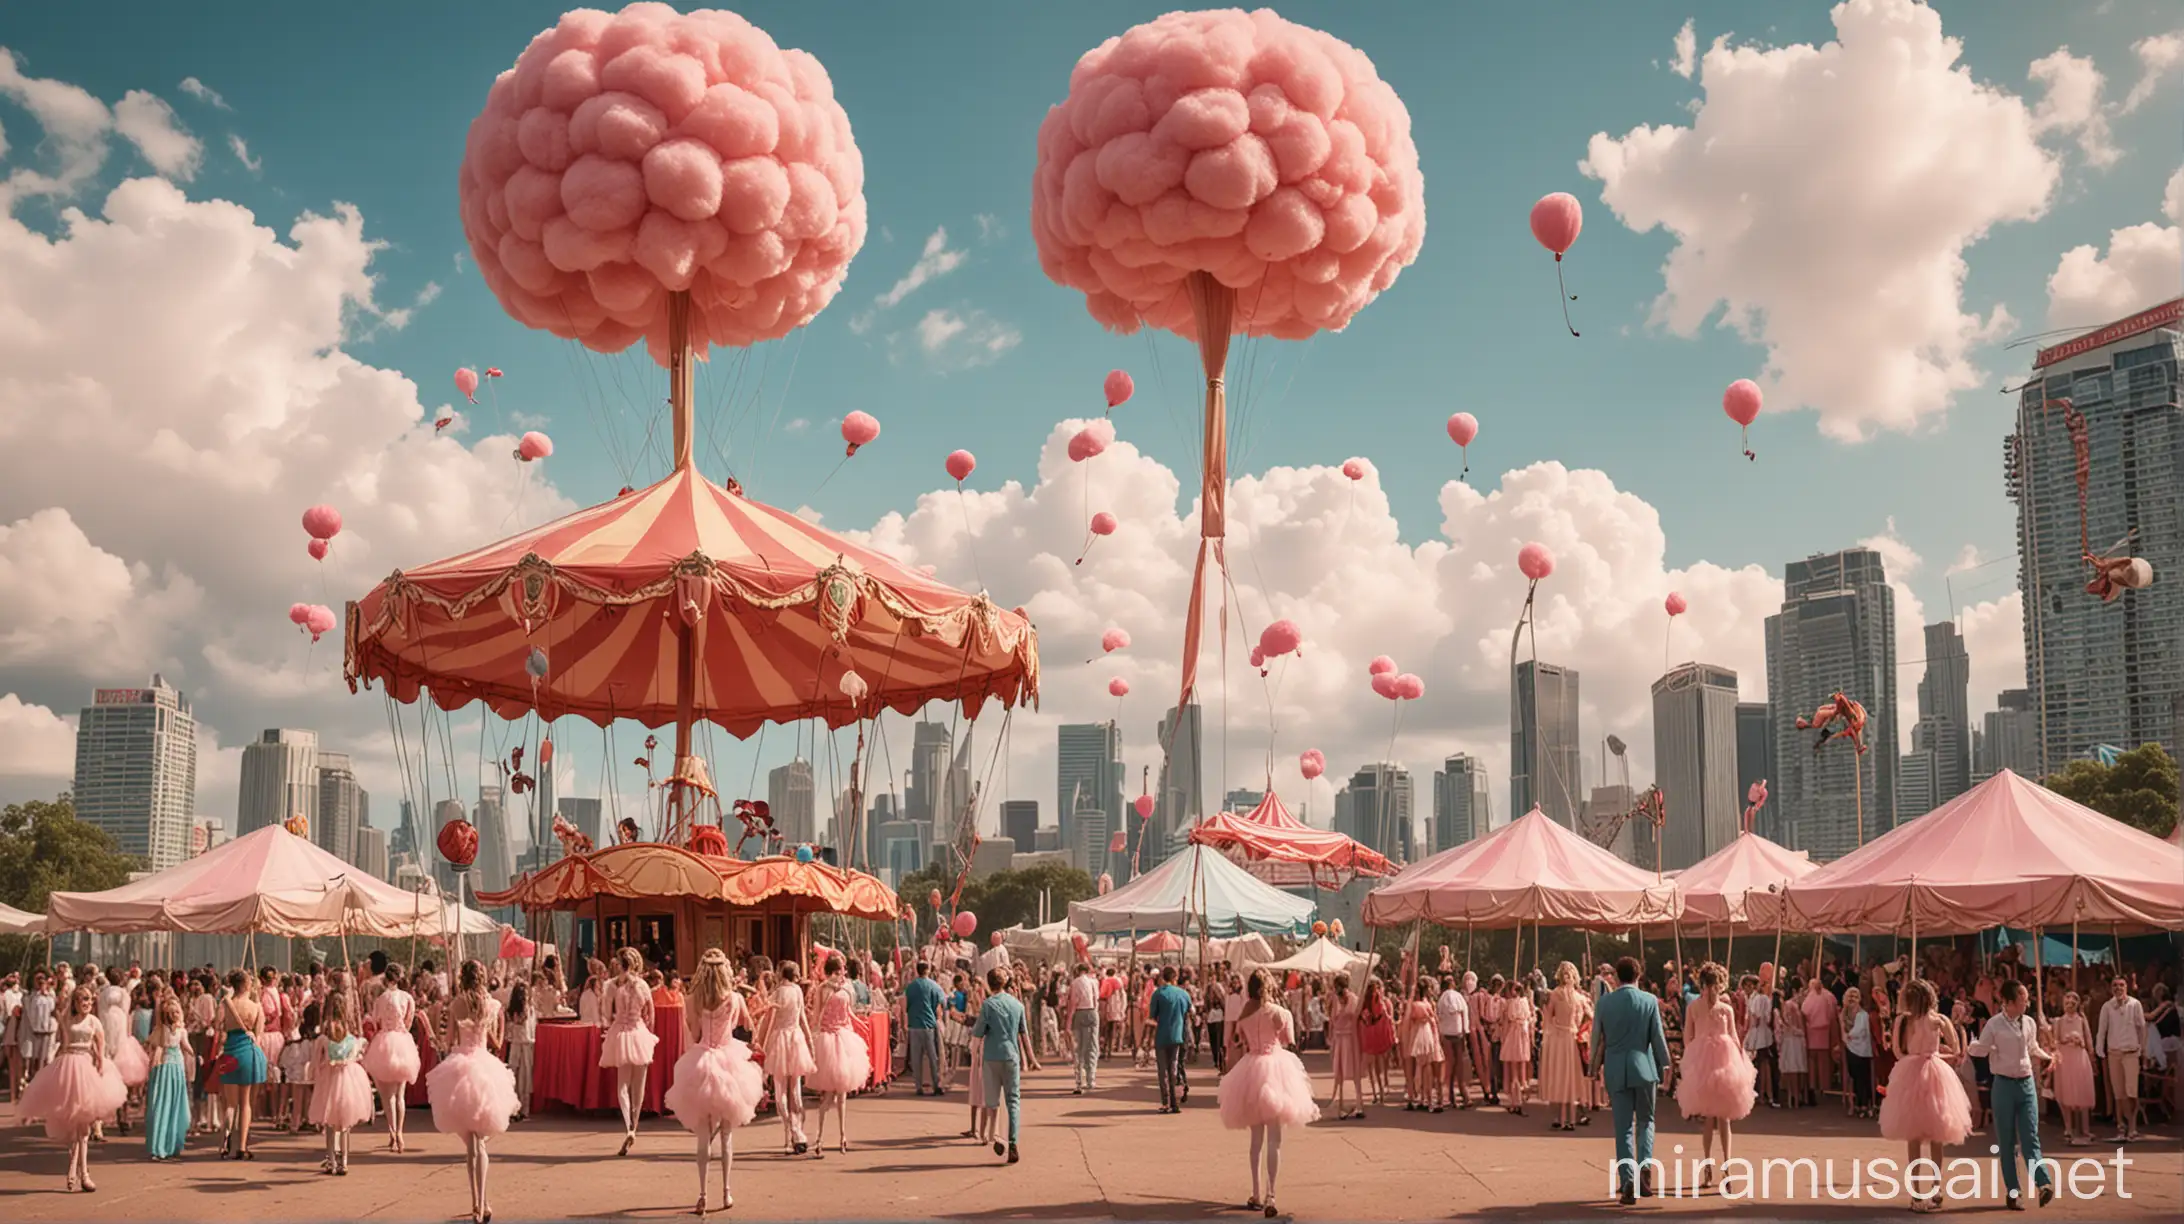 Colorful Circus Scene with Flamingos Stilt Walkers and Cotton Candy Delights